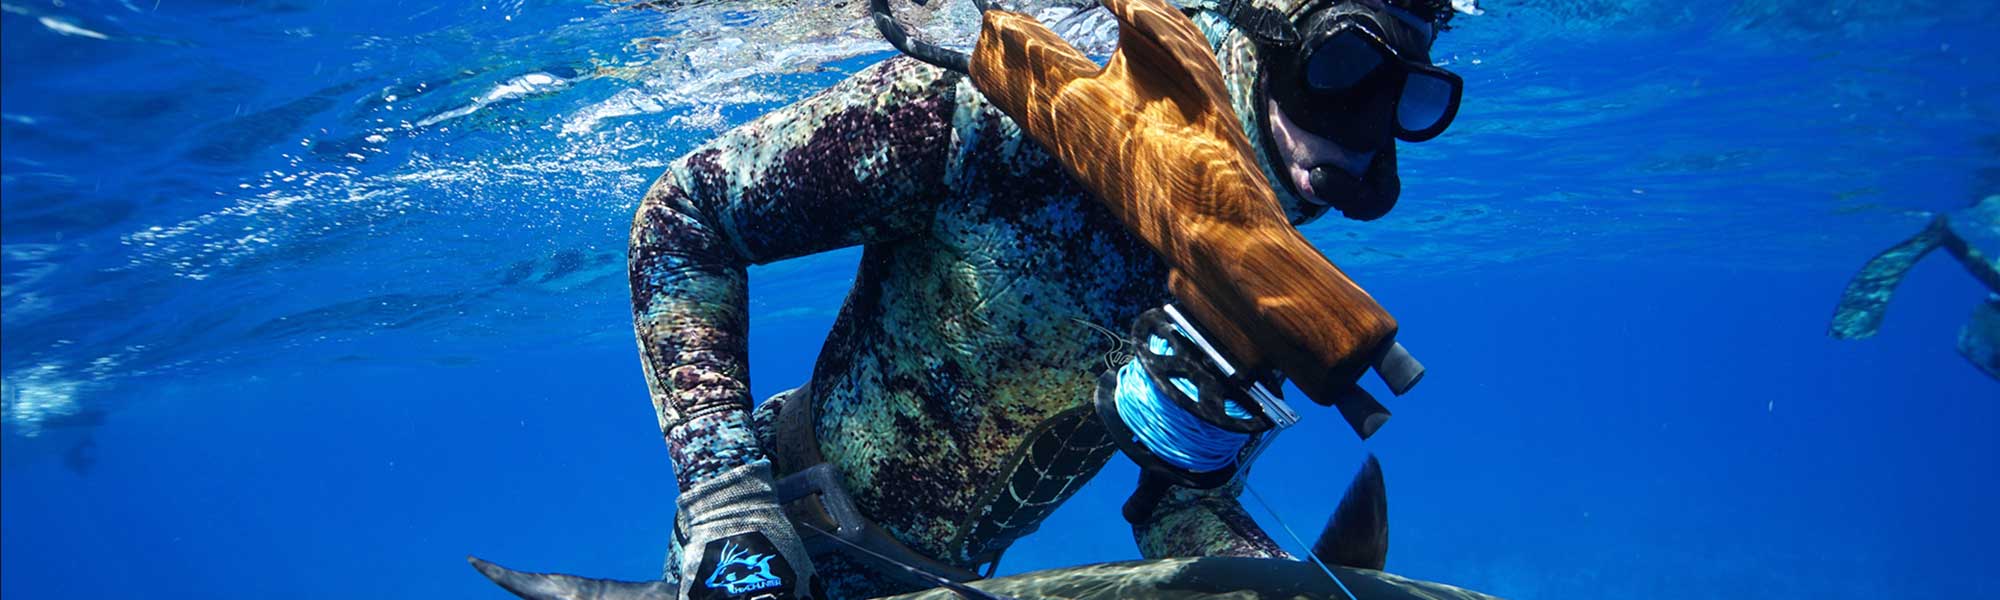 The Headhunter Spearfishing Co.  Designers of performance pole spears, hawaiian  slings, and quality apparel for the ocean-minded lifestyle.